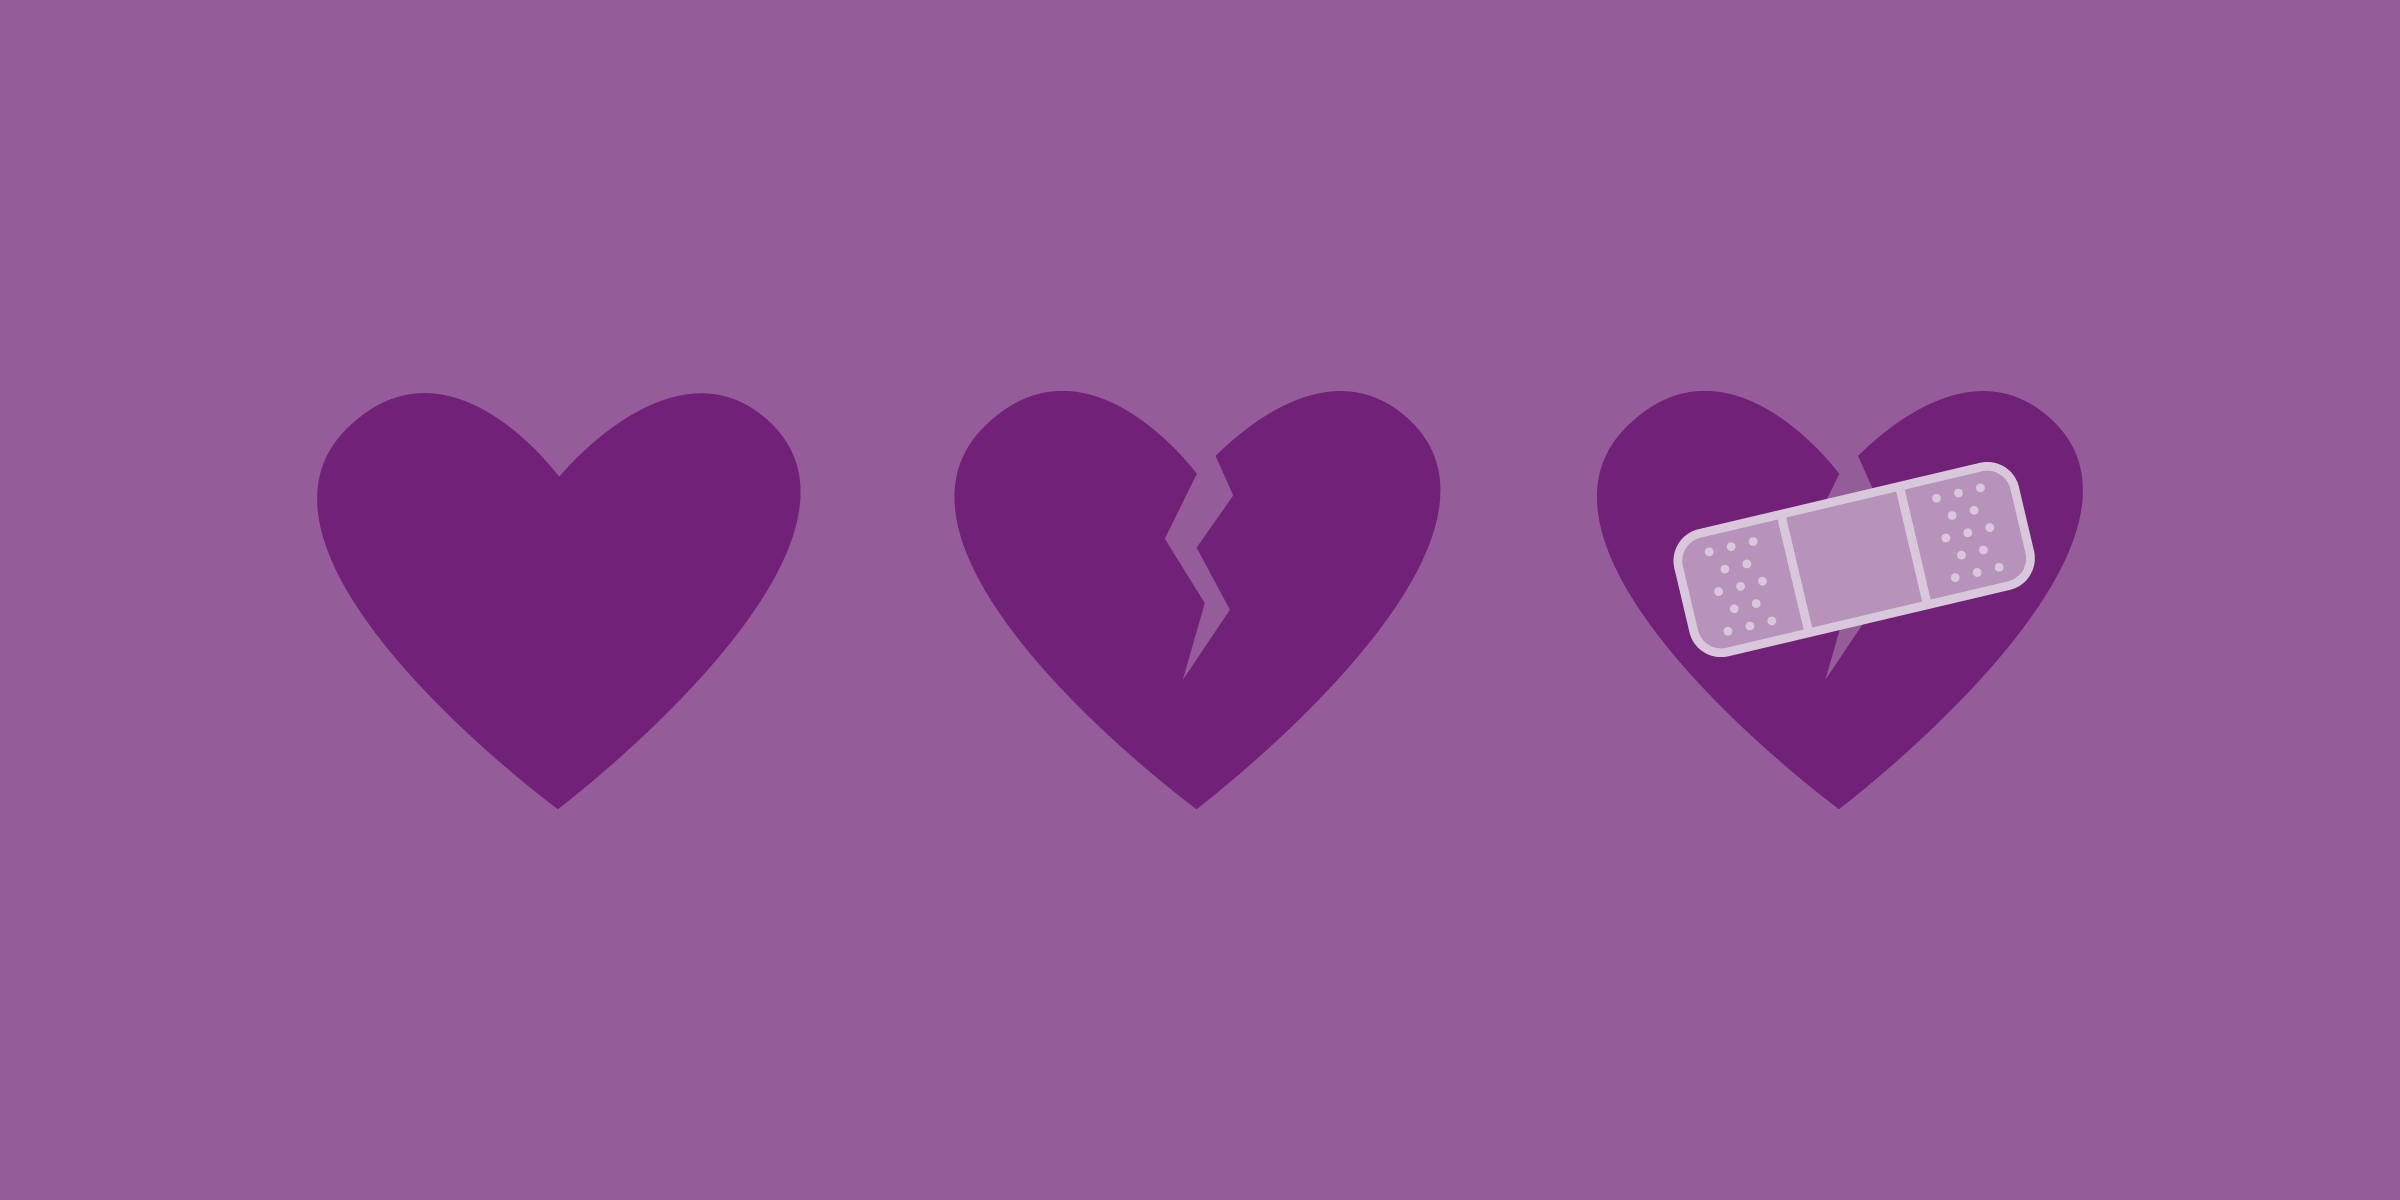 3 purple hearts in a row, one fully functional, one torn apart and another stitched with a patch